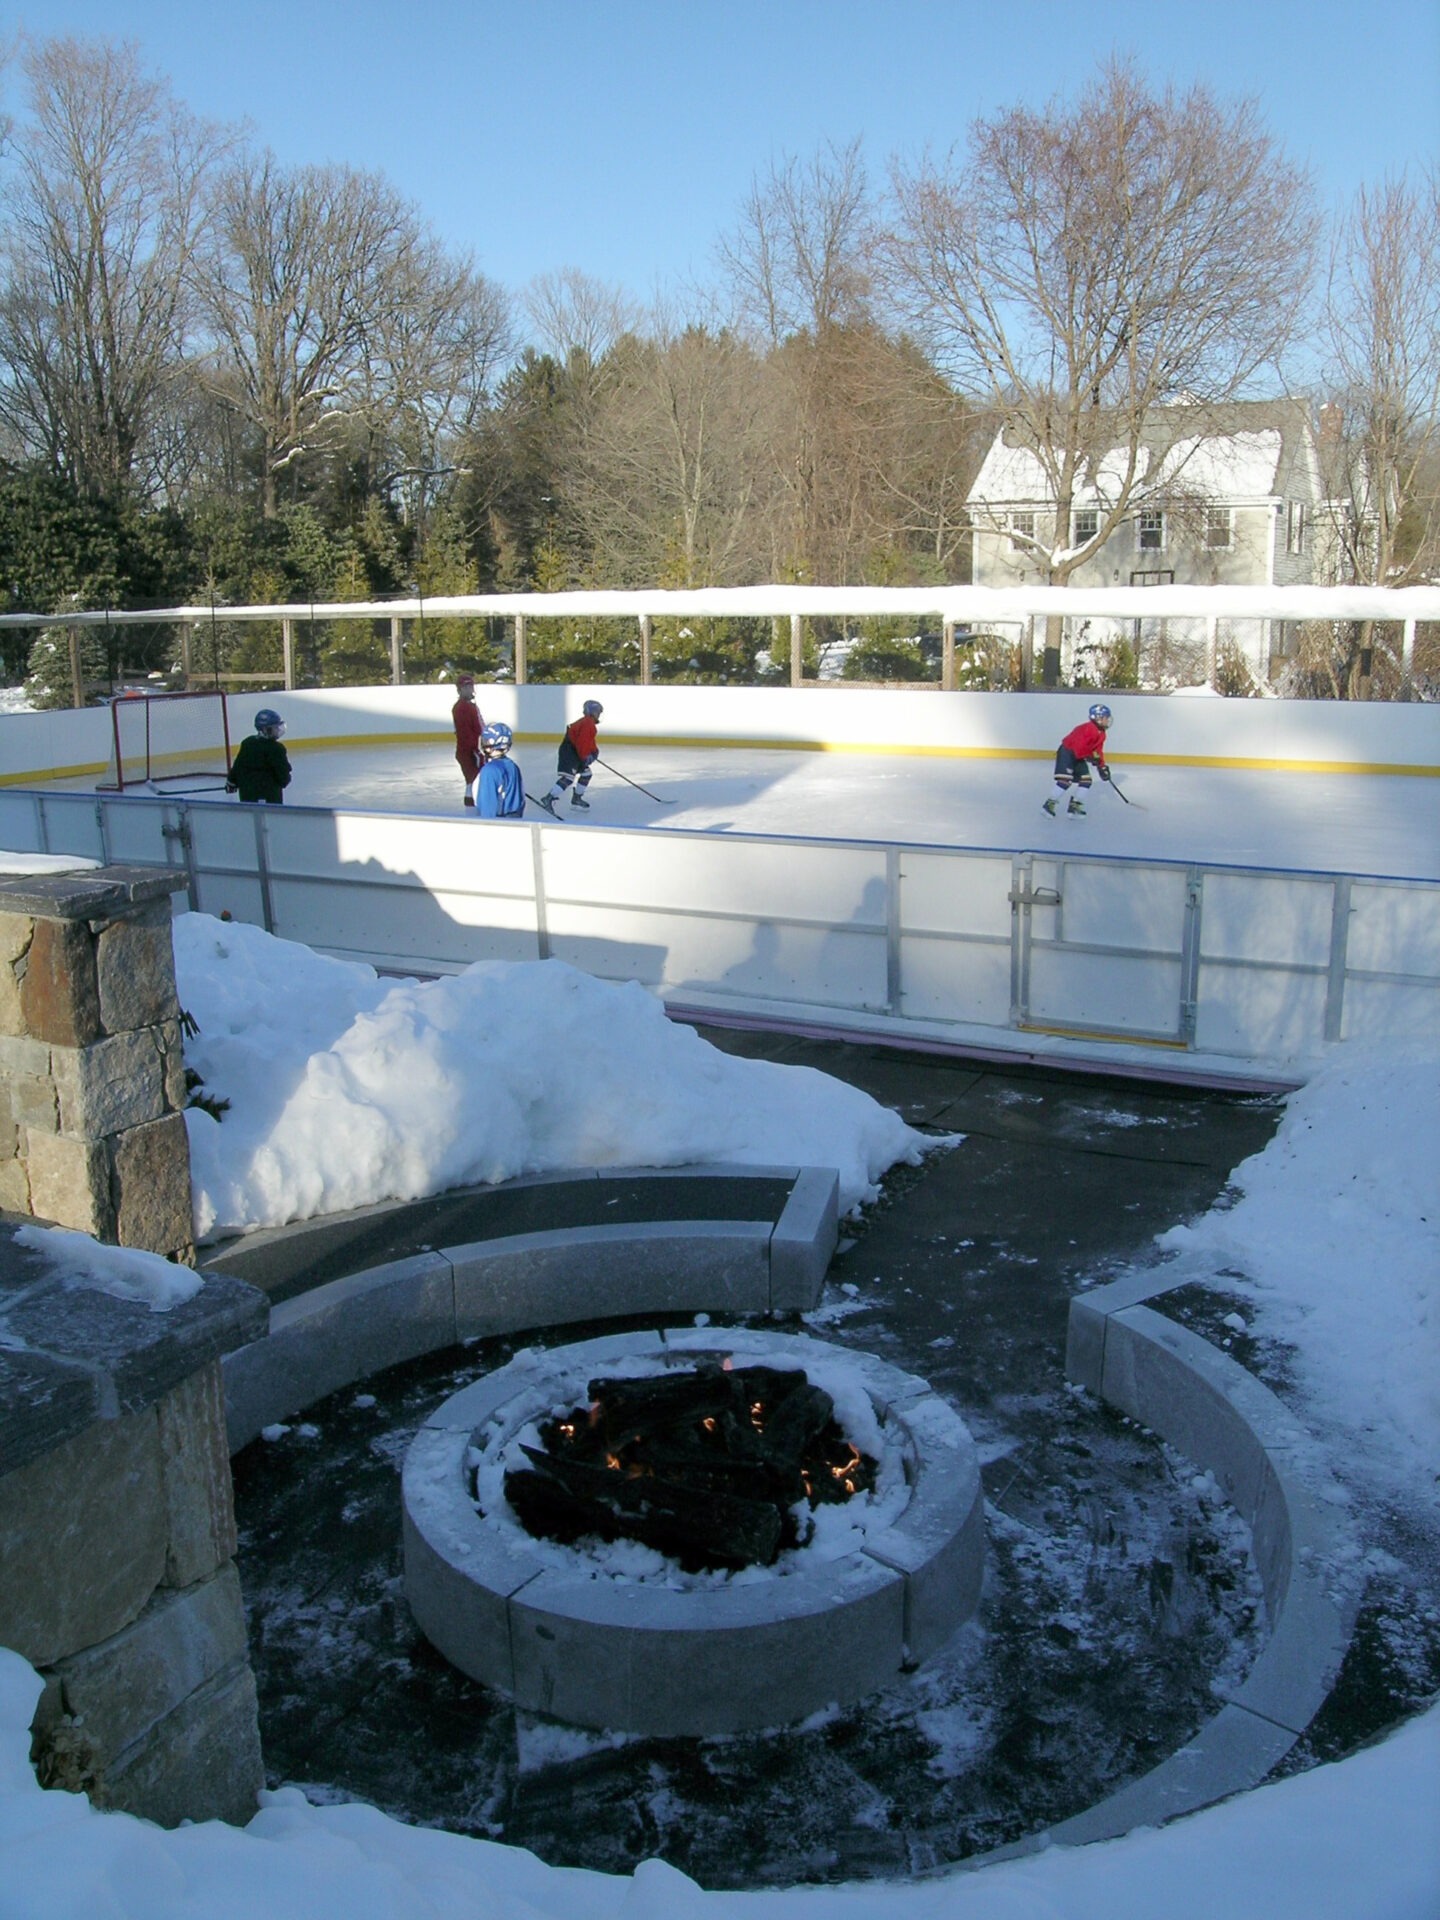 An outdoor ice rink surrounded by snow with four children skating, protected by helmets. A lit fire pit is visible in the foreground, with trees and a house in the background.